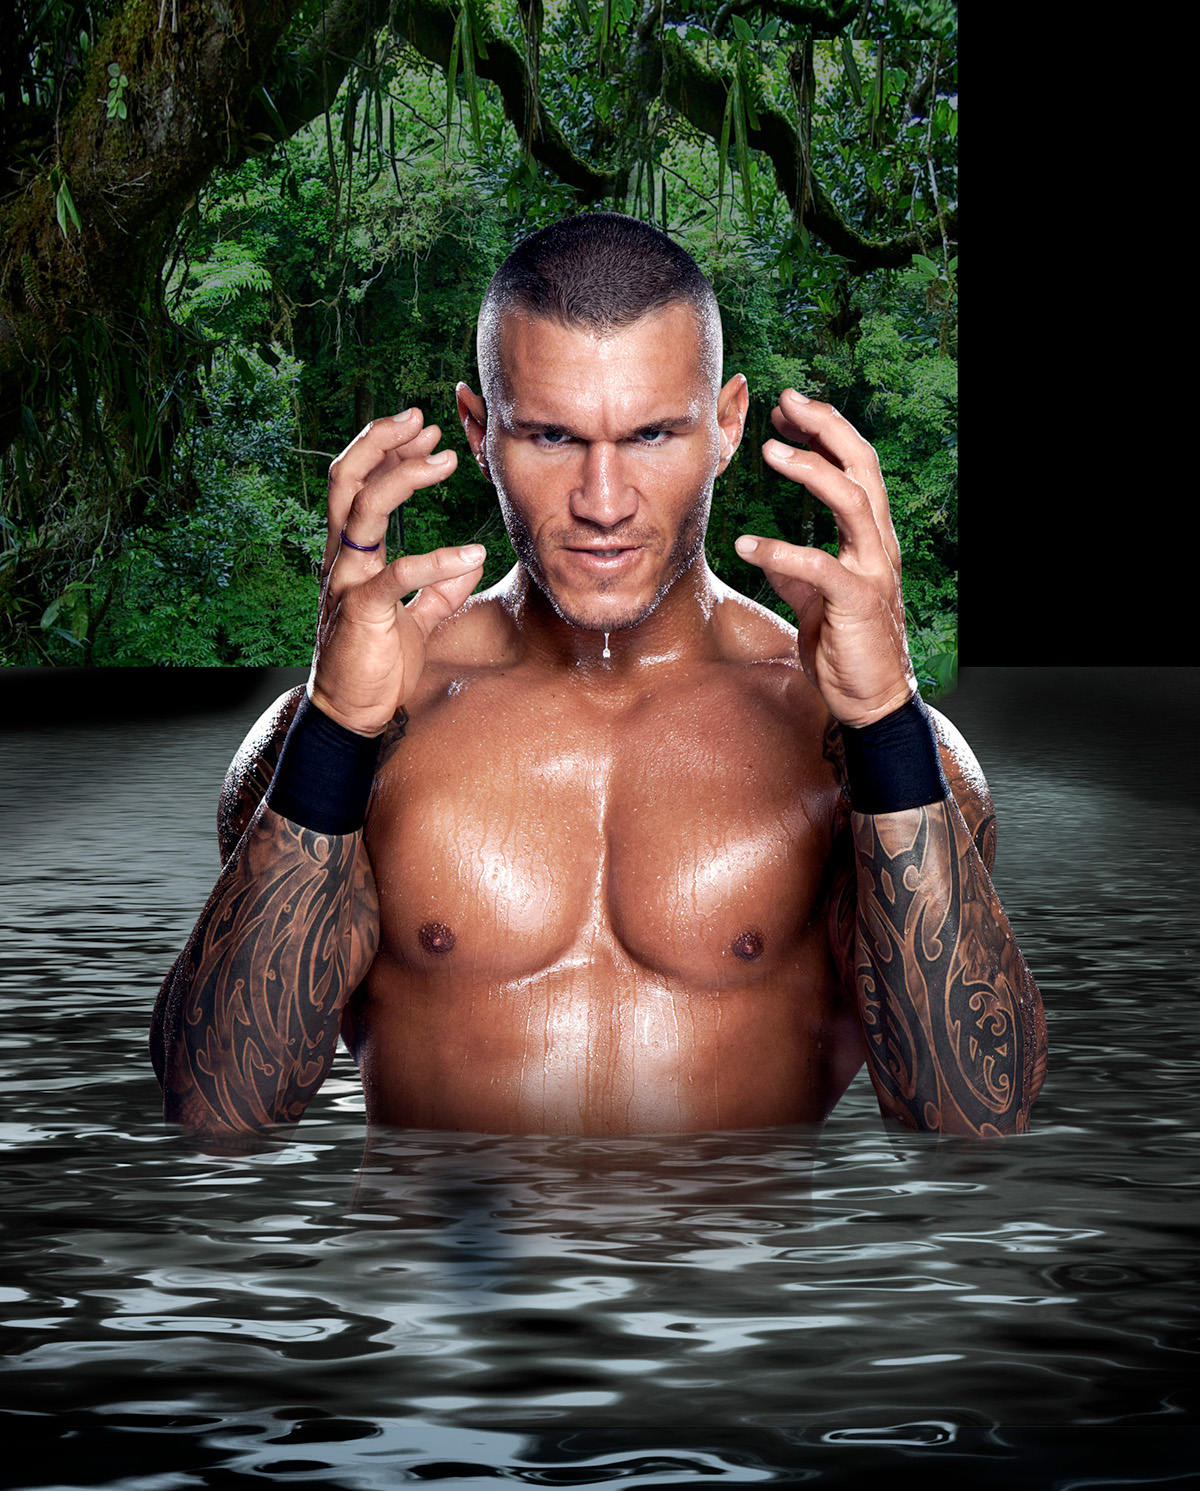 WWE randy orton water splash swamp temple Composite jungle movement publishing   Wrestling mysterious Moody Theatrical